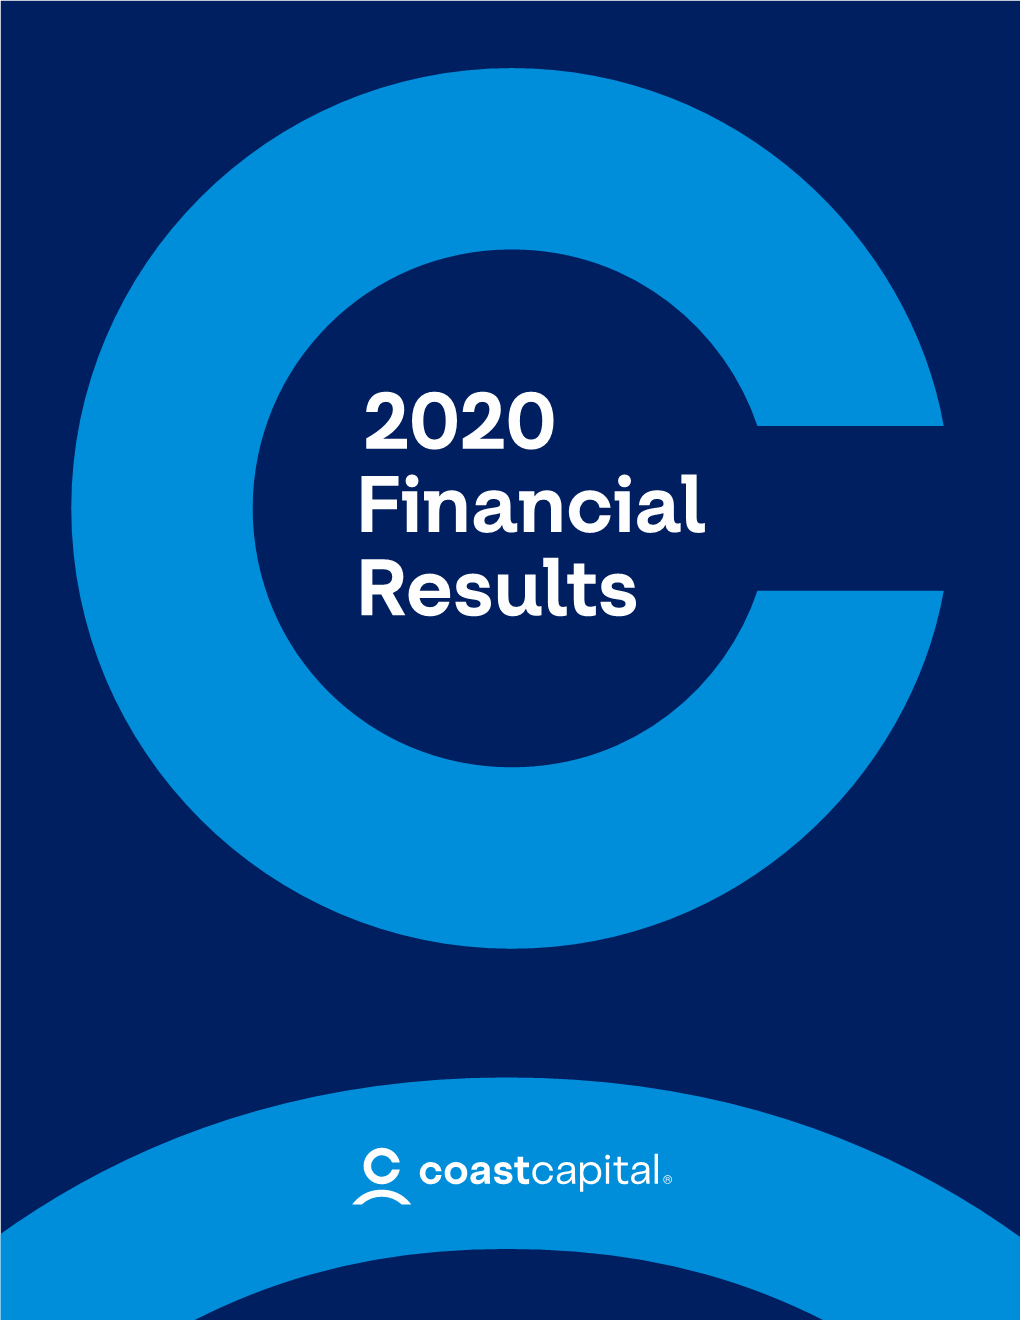 2020 Financial Results Contents